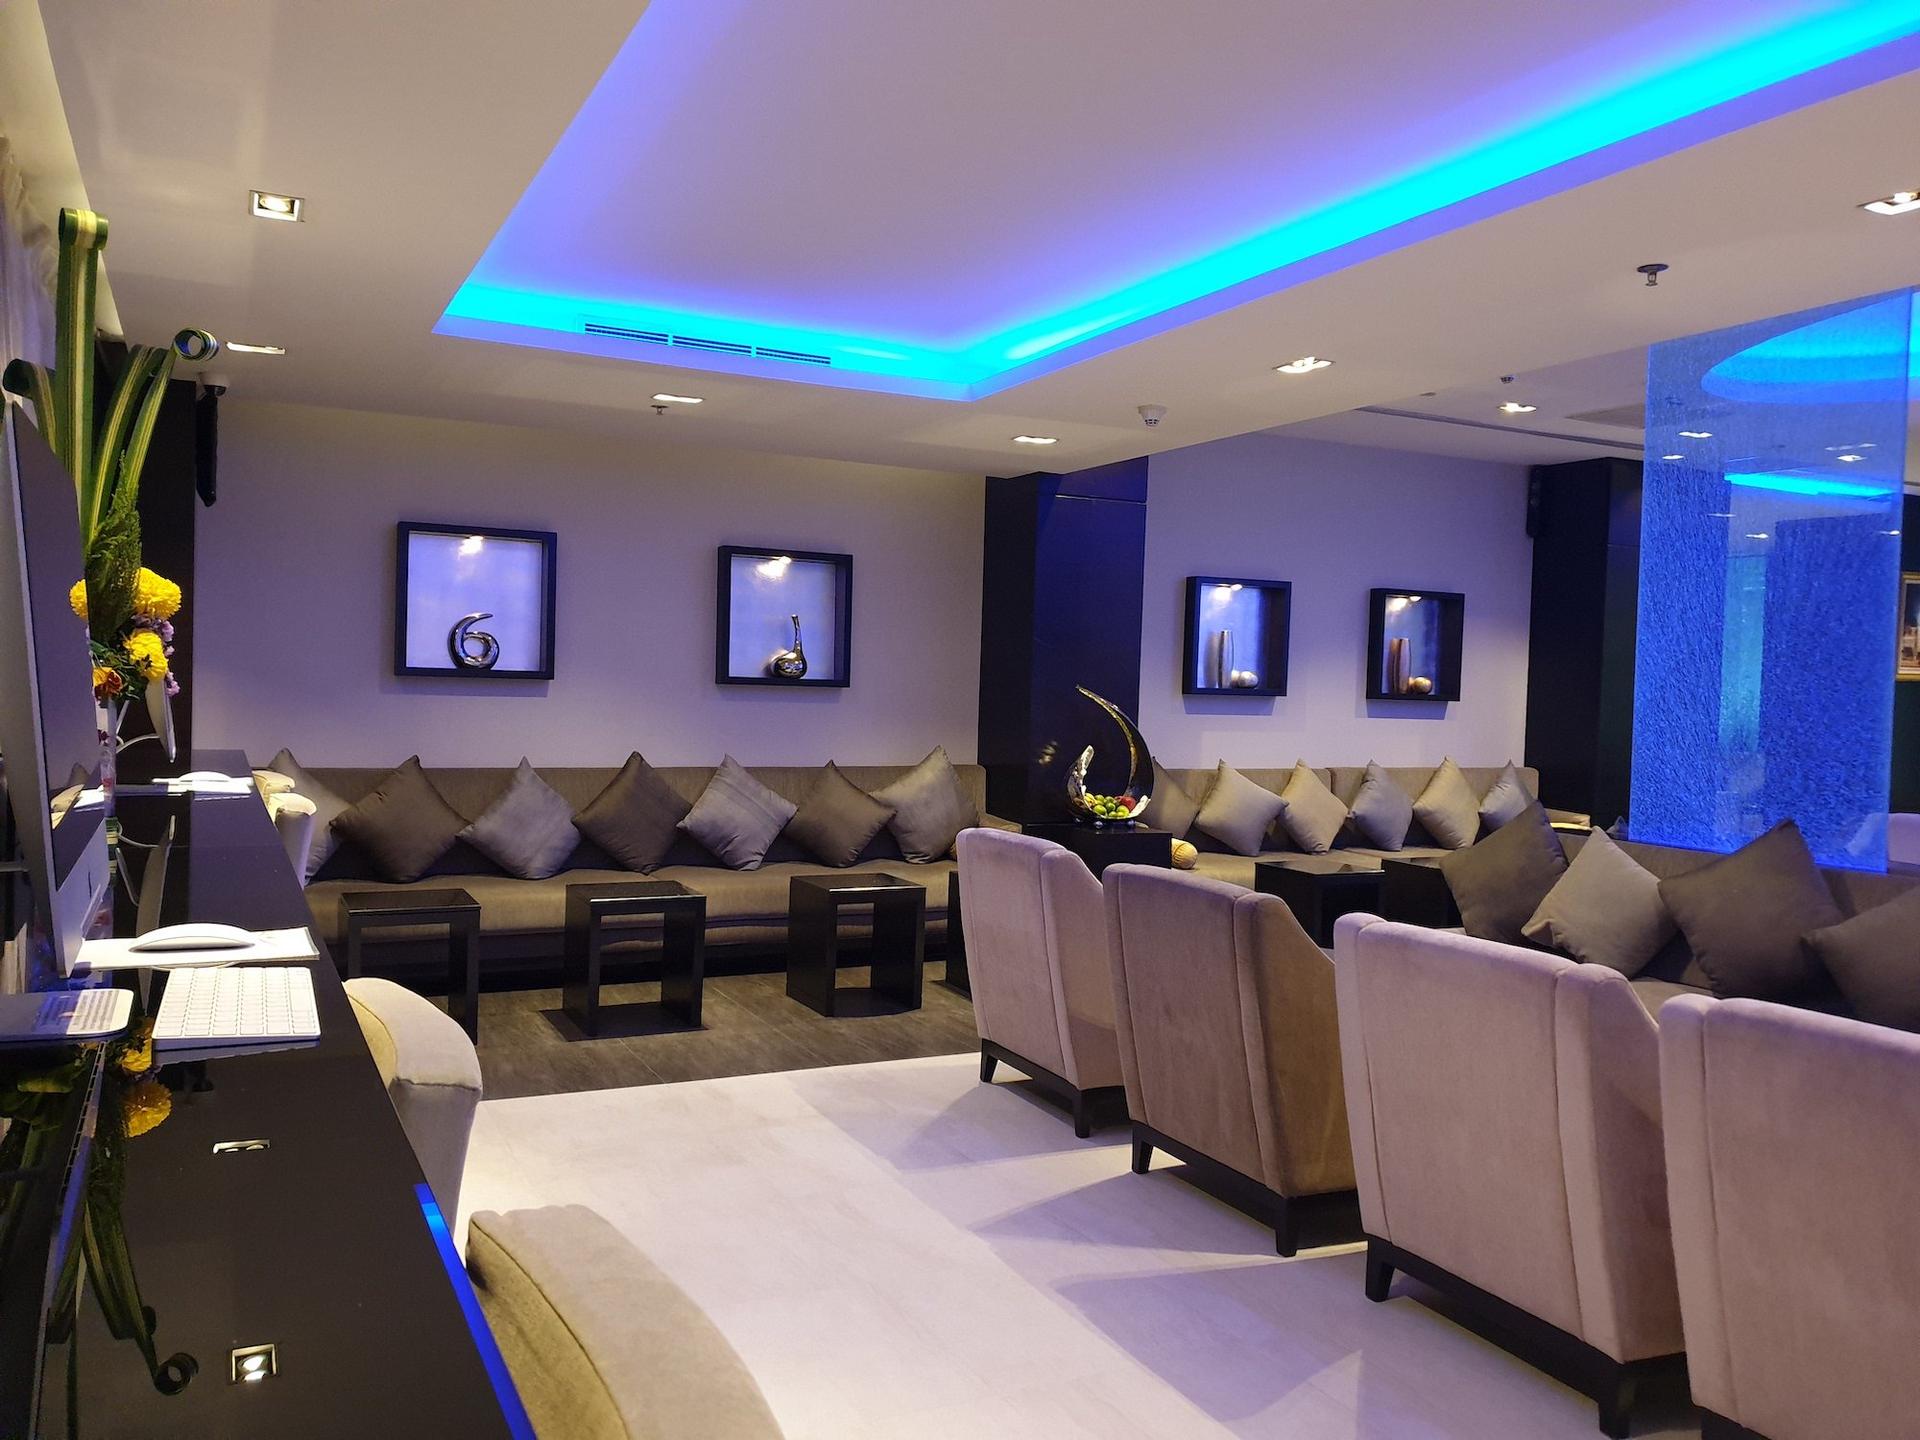 Oman Air First and Business Class Lounge image 45 of 50